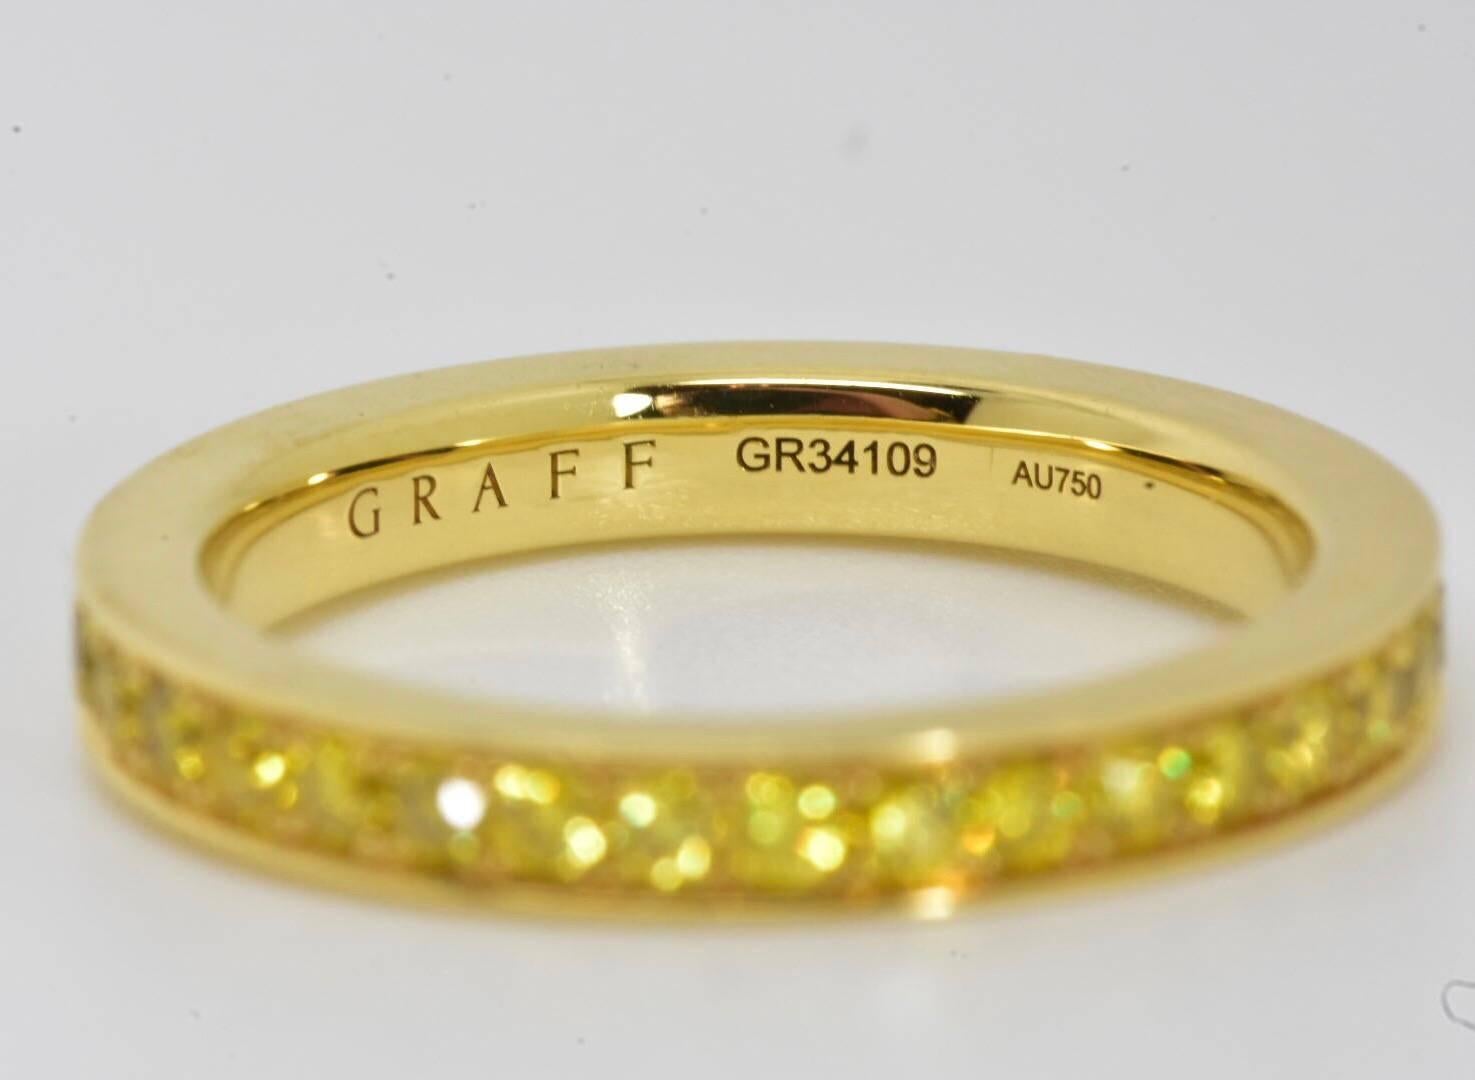 A Graff full diamond yellow diamond eternity ring set in 18k yellow. The ring features 35 brilliant-cut round yellow diamonds of approx 0.85 carat
The ring is not sold with the origianl box or papers.
Retail price approx £10k
Hallmarks: Graff,